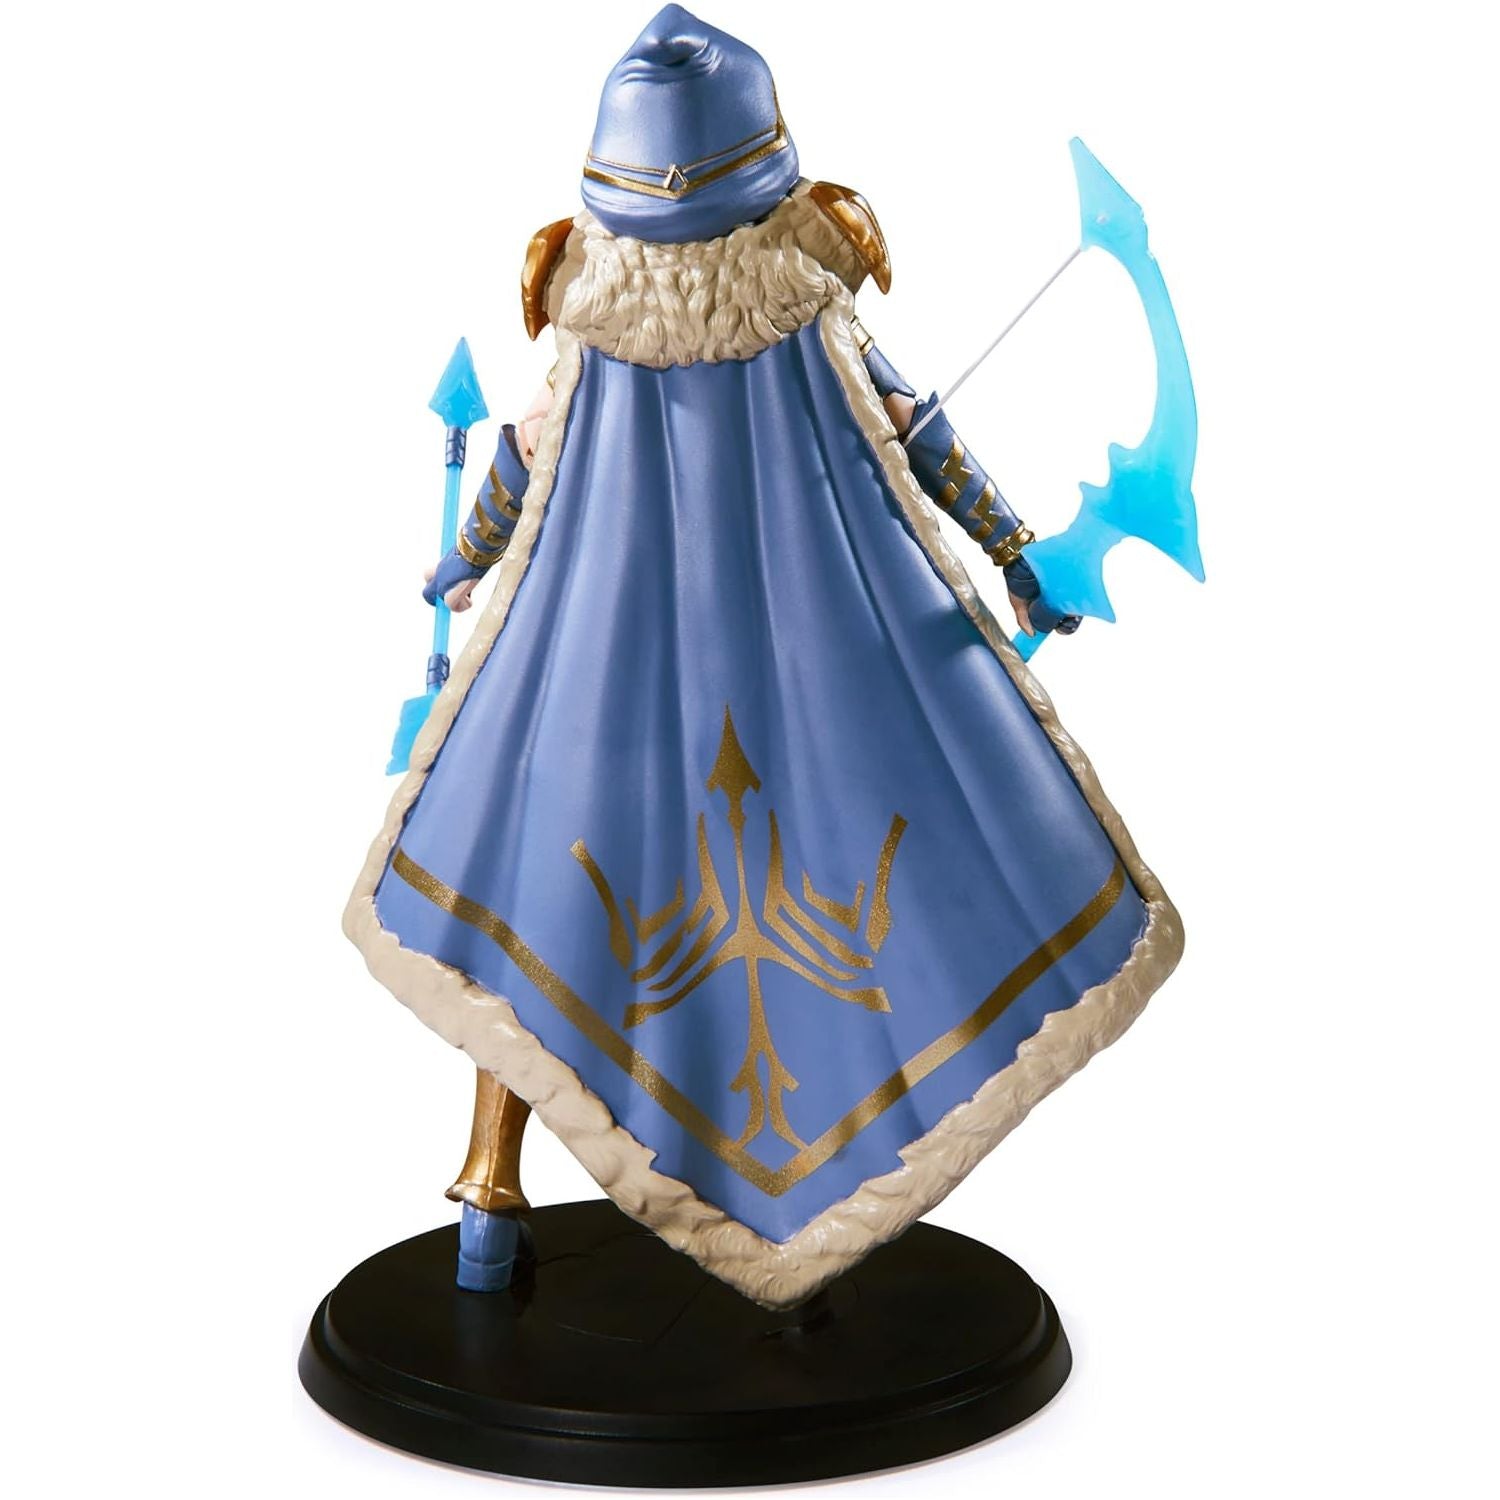 League of Legends, Official 6-Inch Ashe Collectible Figure